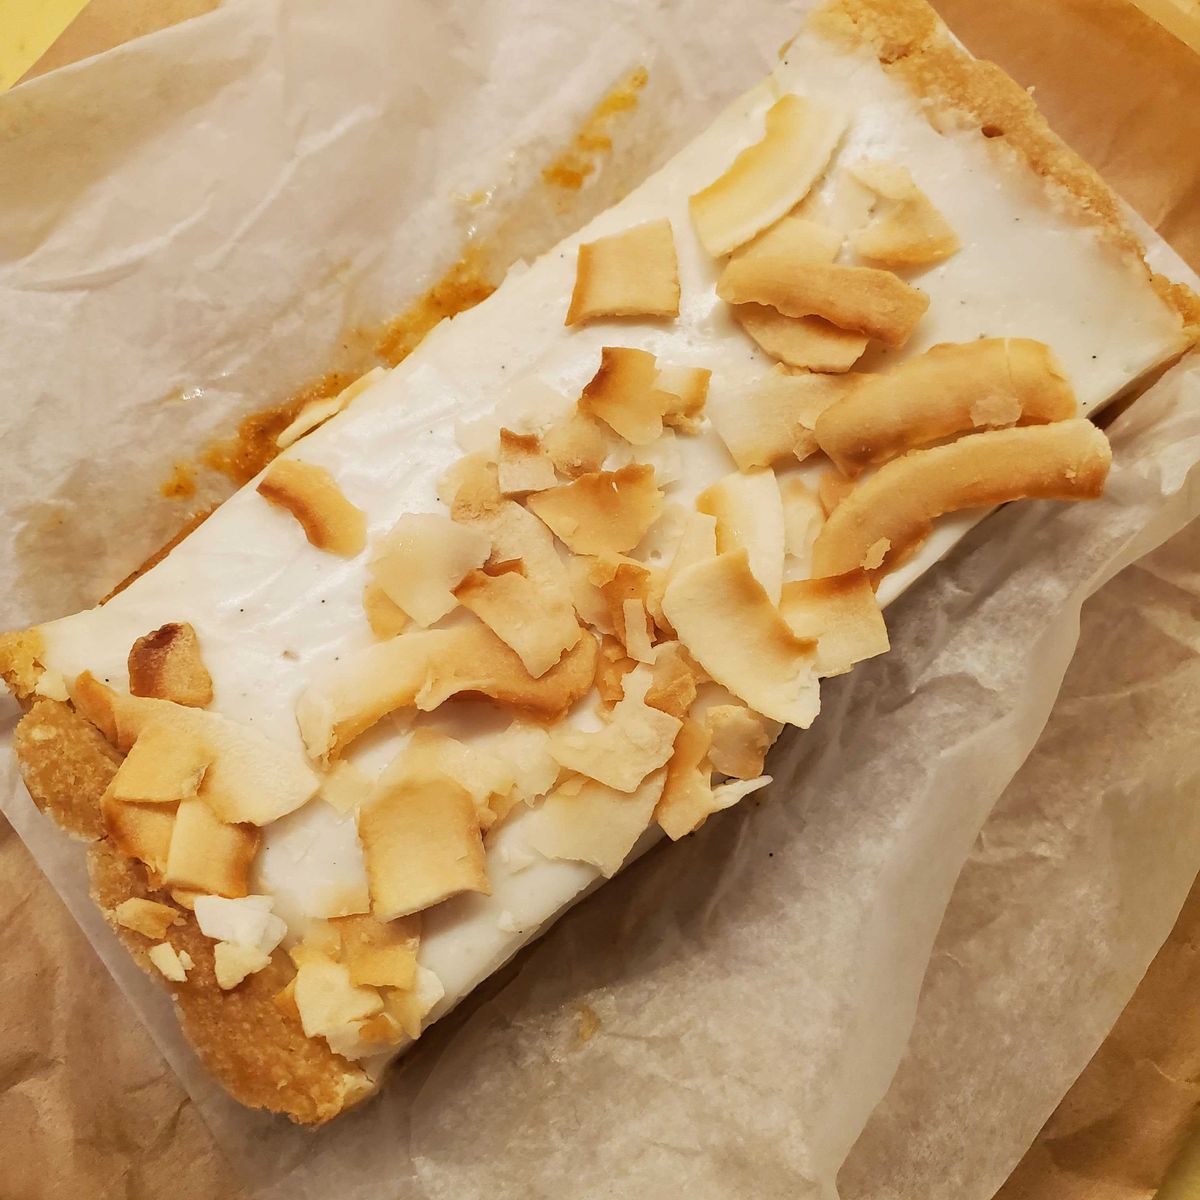 An up-close picture of a pumpkin-haupia shortbread bar from pop-up Not Too Sweet.